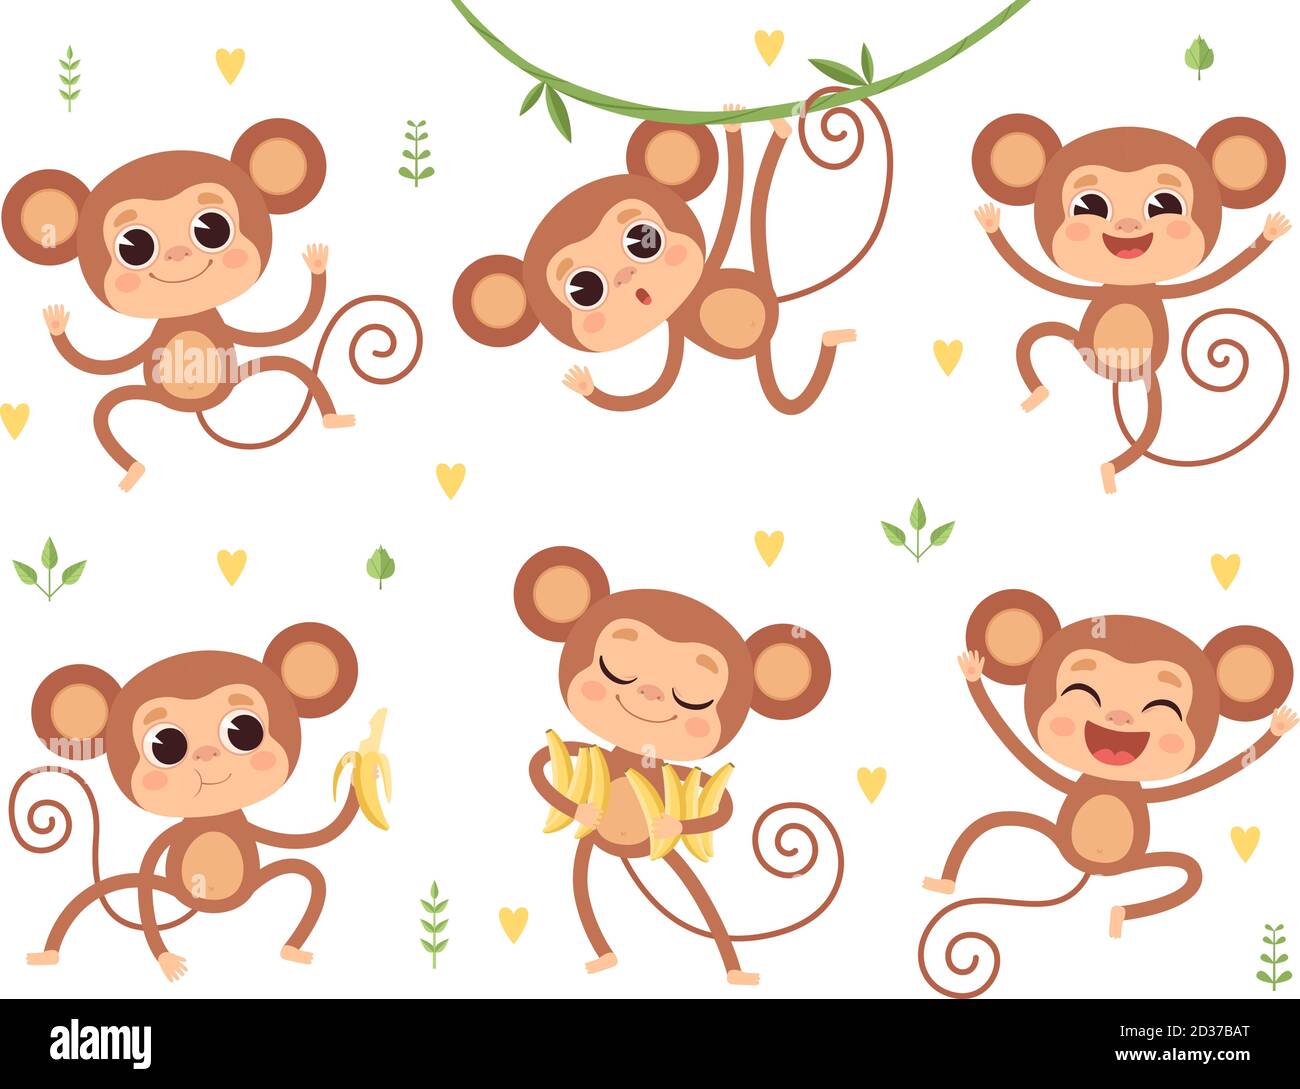 Cute monkeys. Jungle wild animals baby little monkeys playing vector characters in action poses Stock Vector